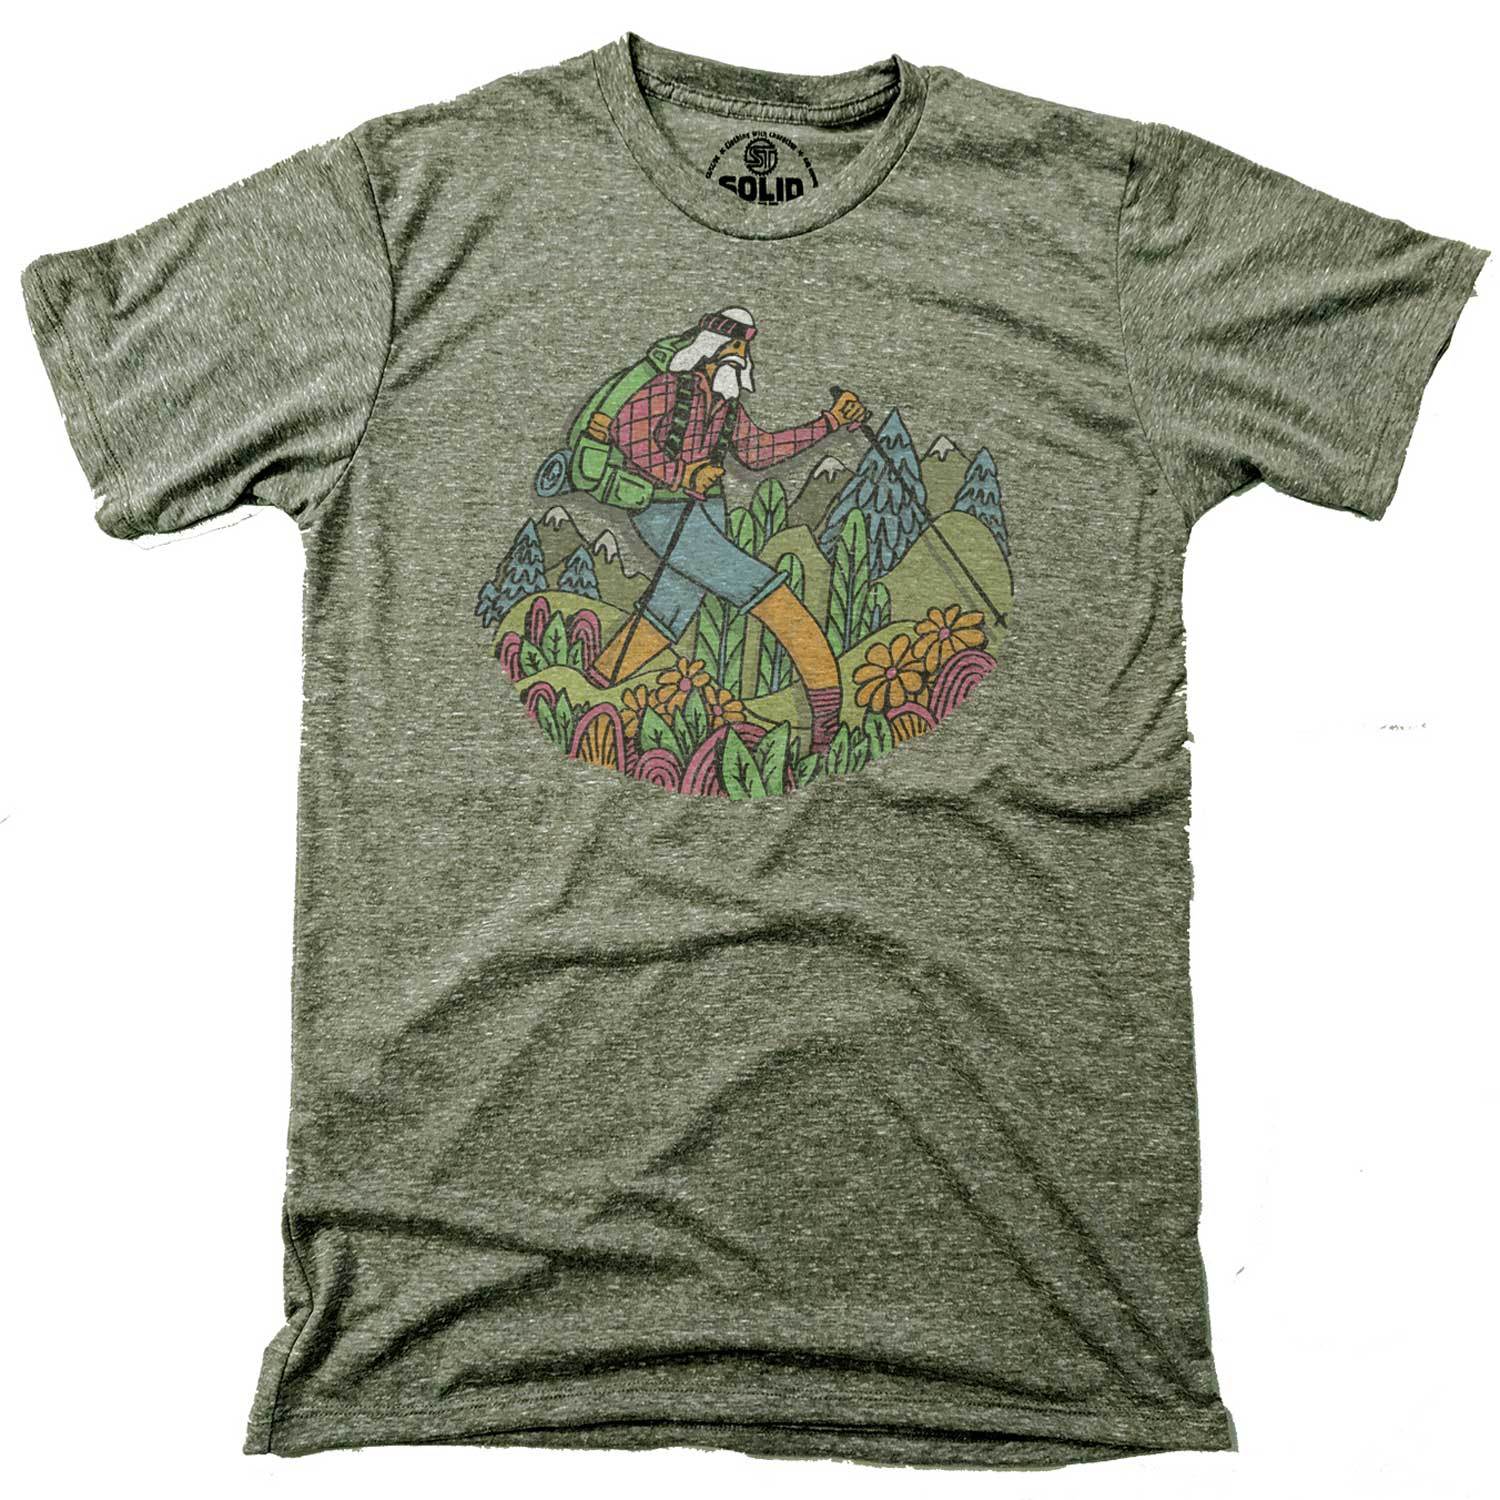 Men's Vintage Wise Hiker Graphic Tee | Retro Hiking T-shirt | Solid Threads